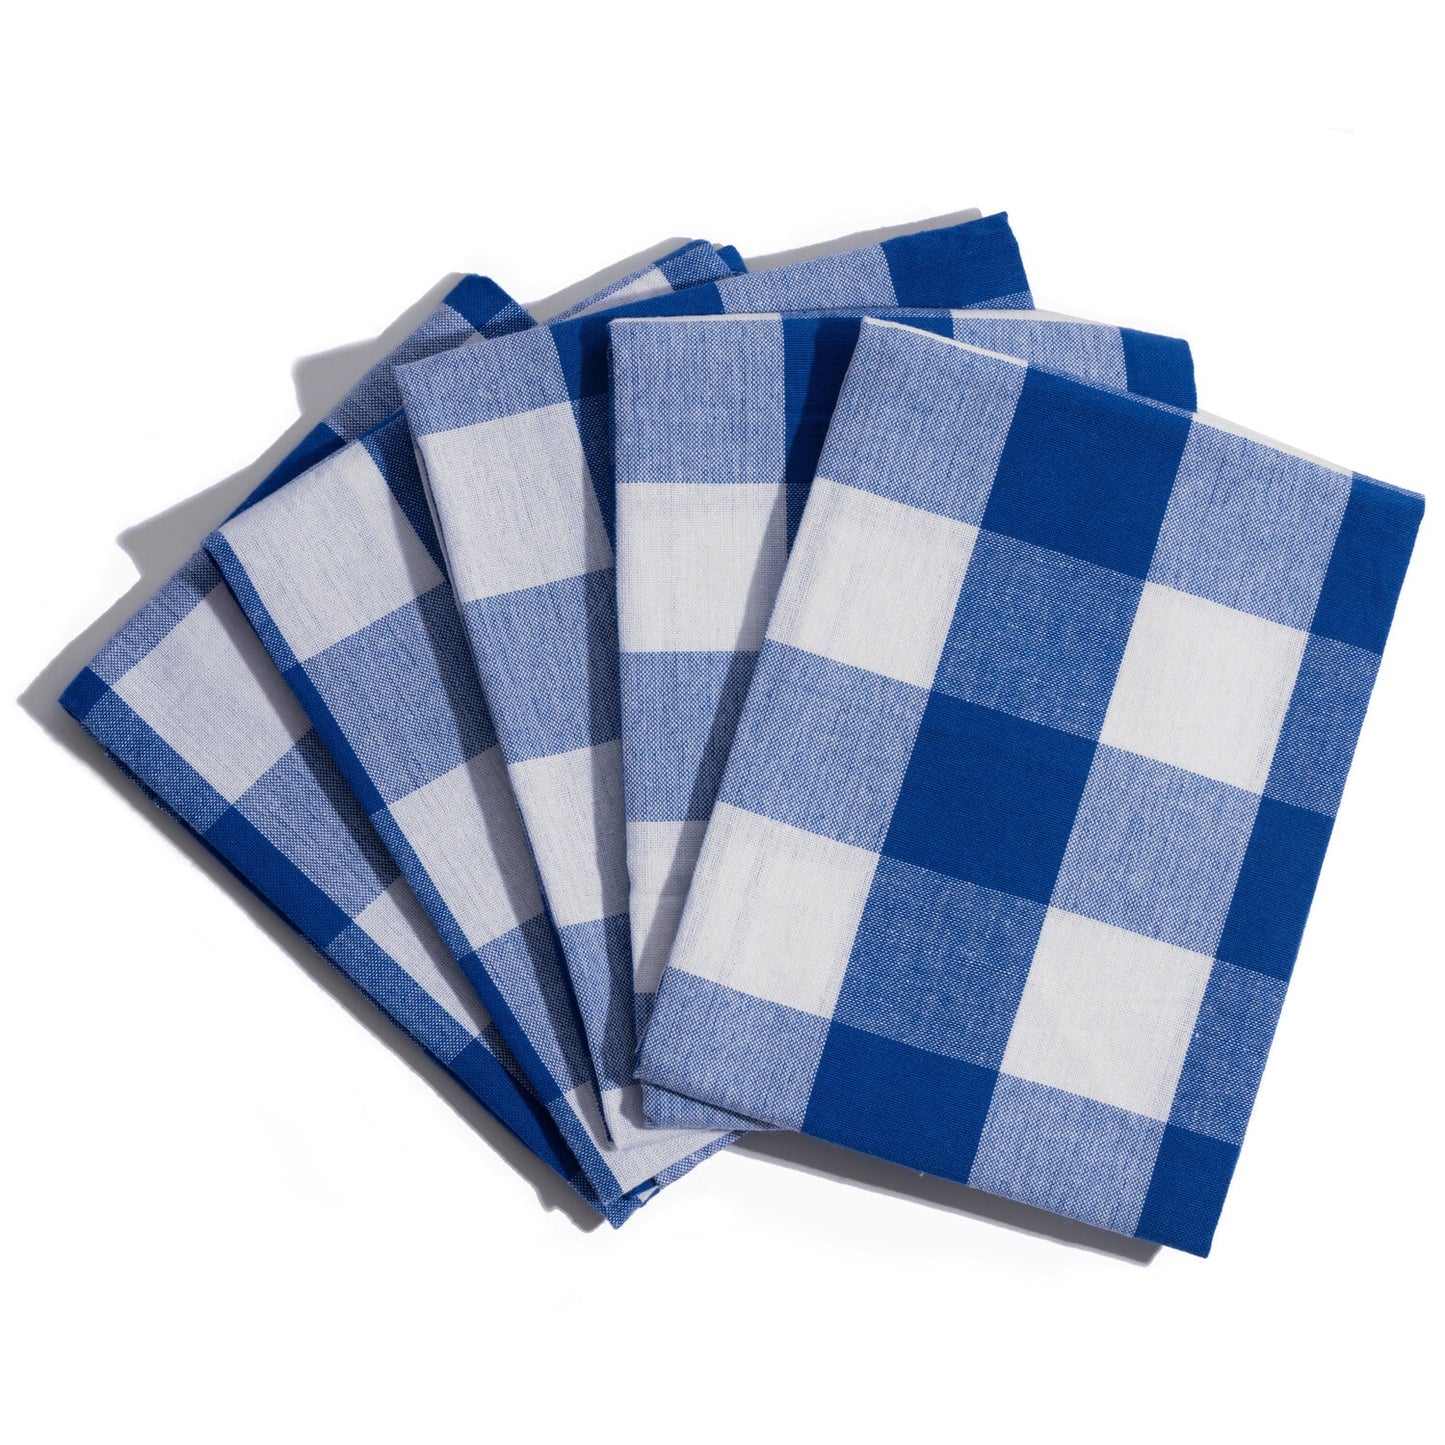 Blue Checkered Side Towel (5-Pack), Apparel